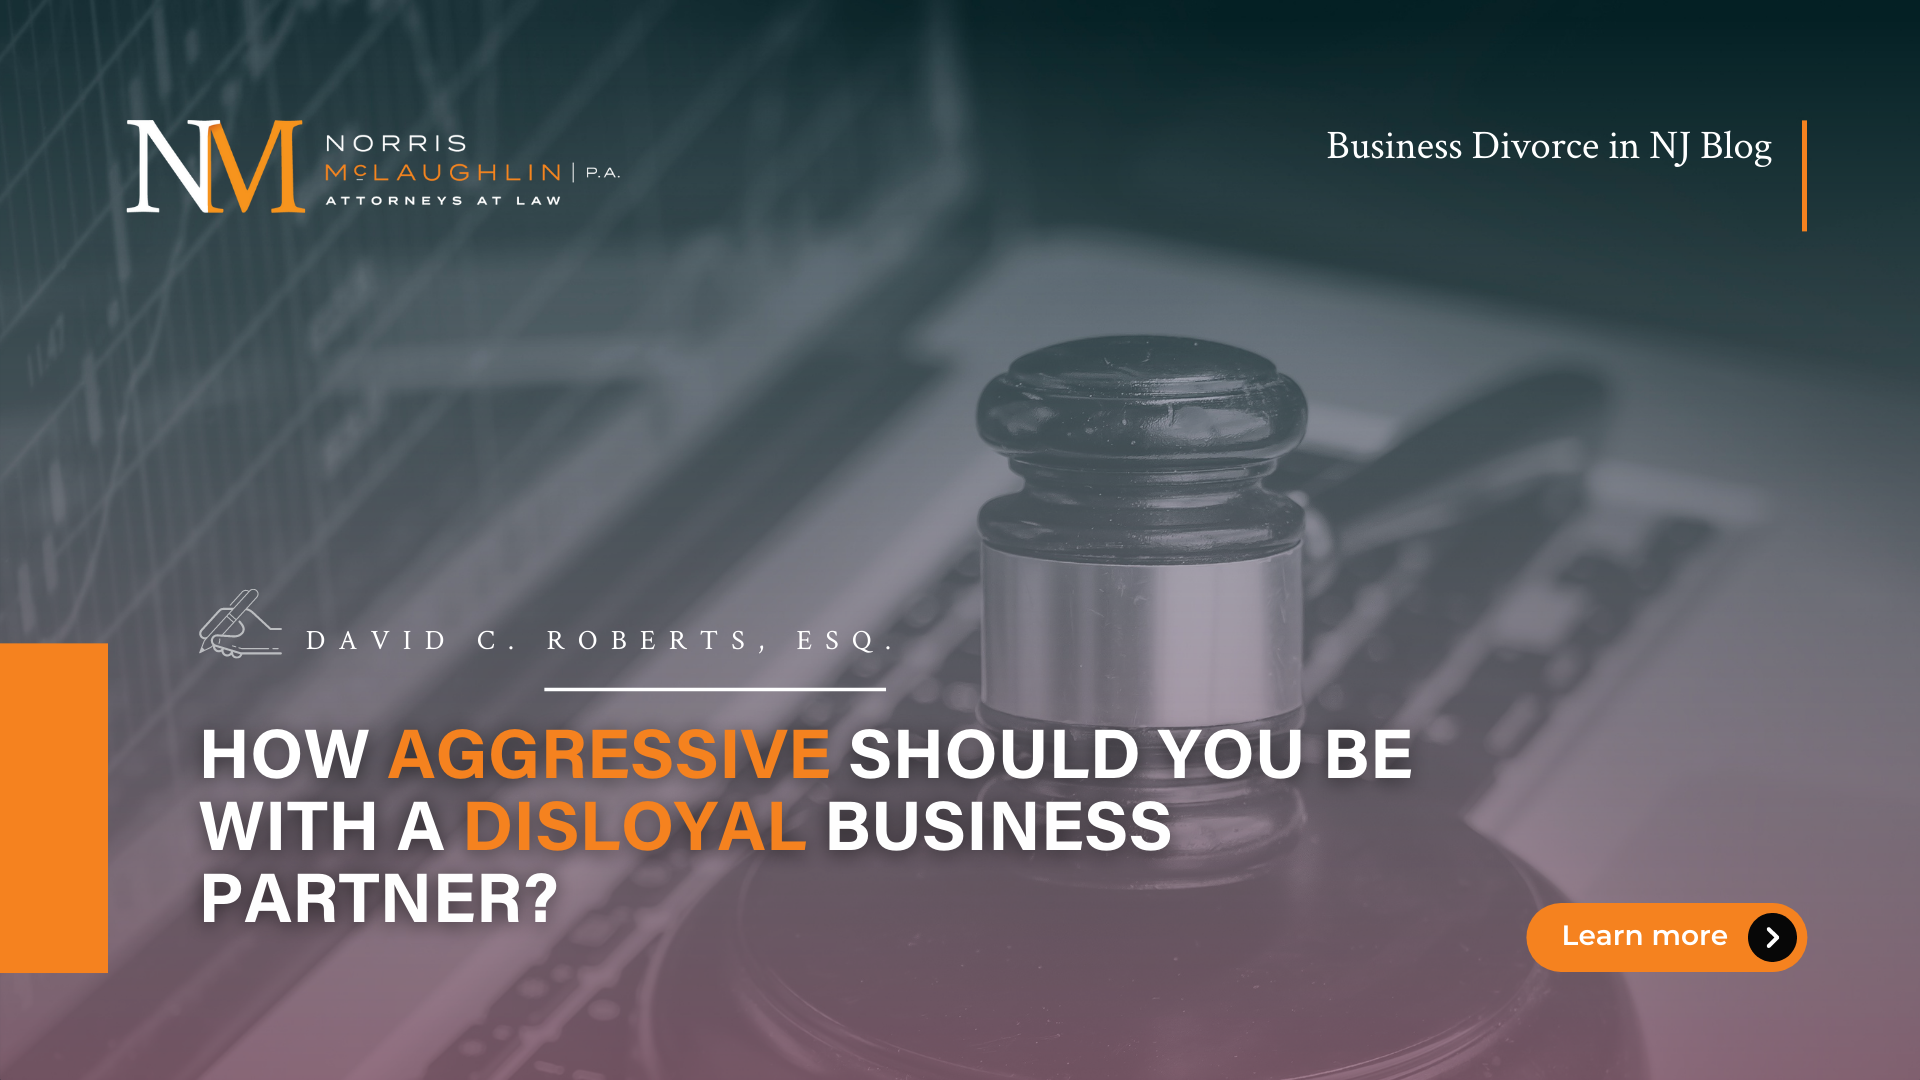 How Aggressive Should You Be With a Disloyal Business Partner?